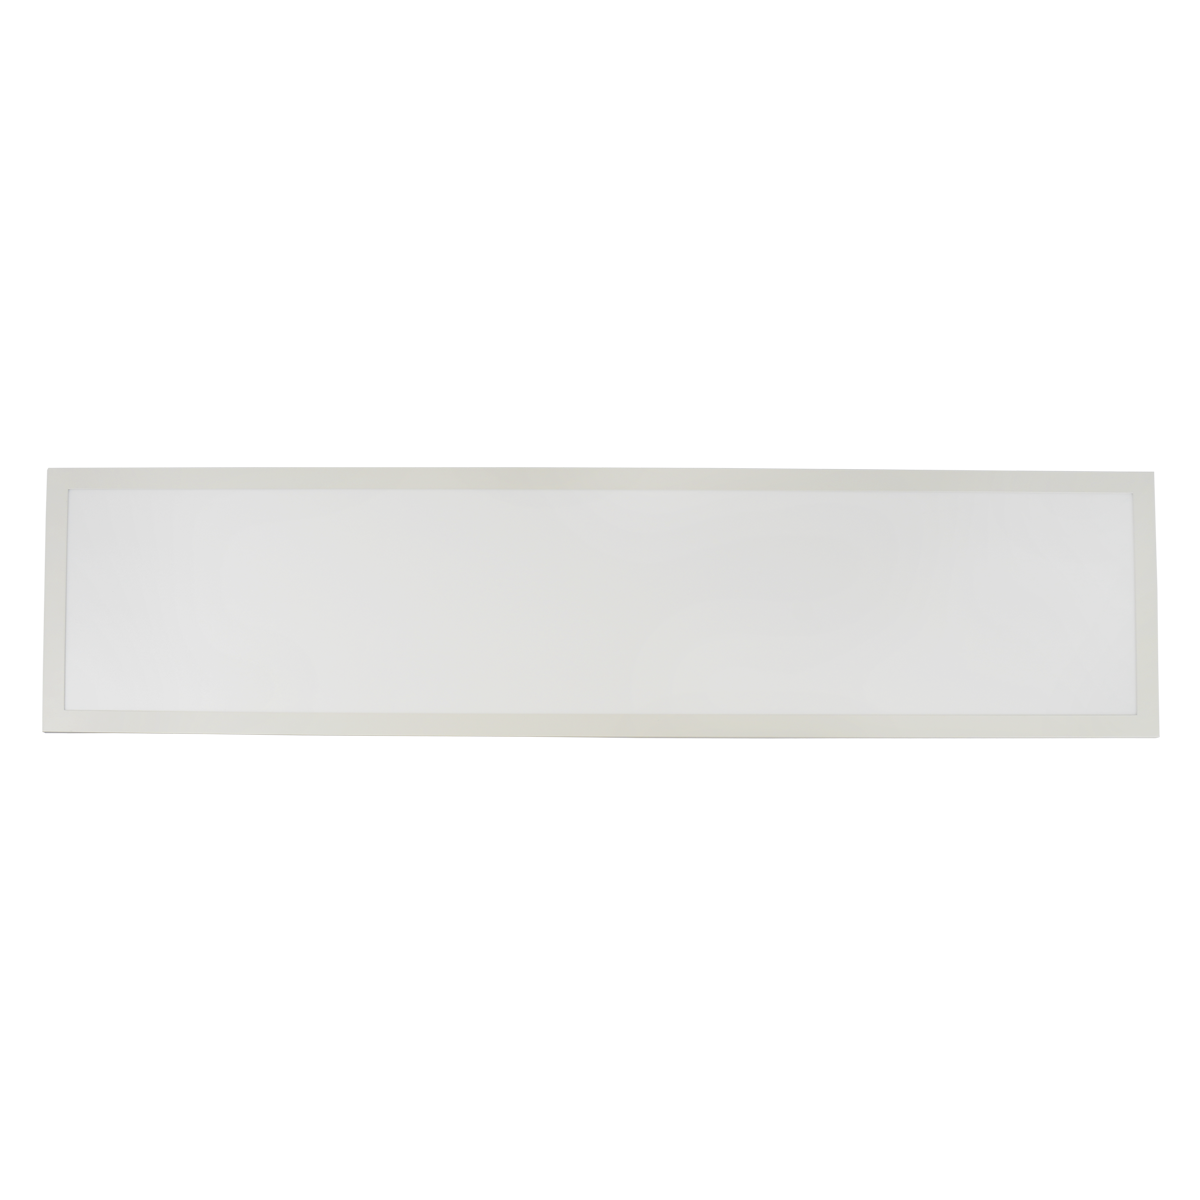 1x4 LED Backlit Panel, 3750 Lumen Max, Wattage and CCT Selectable, Dimmable, 120-347V